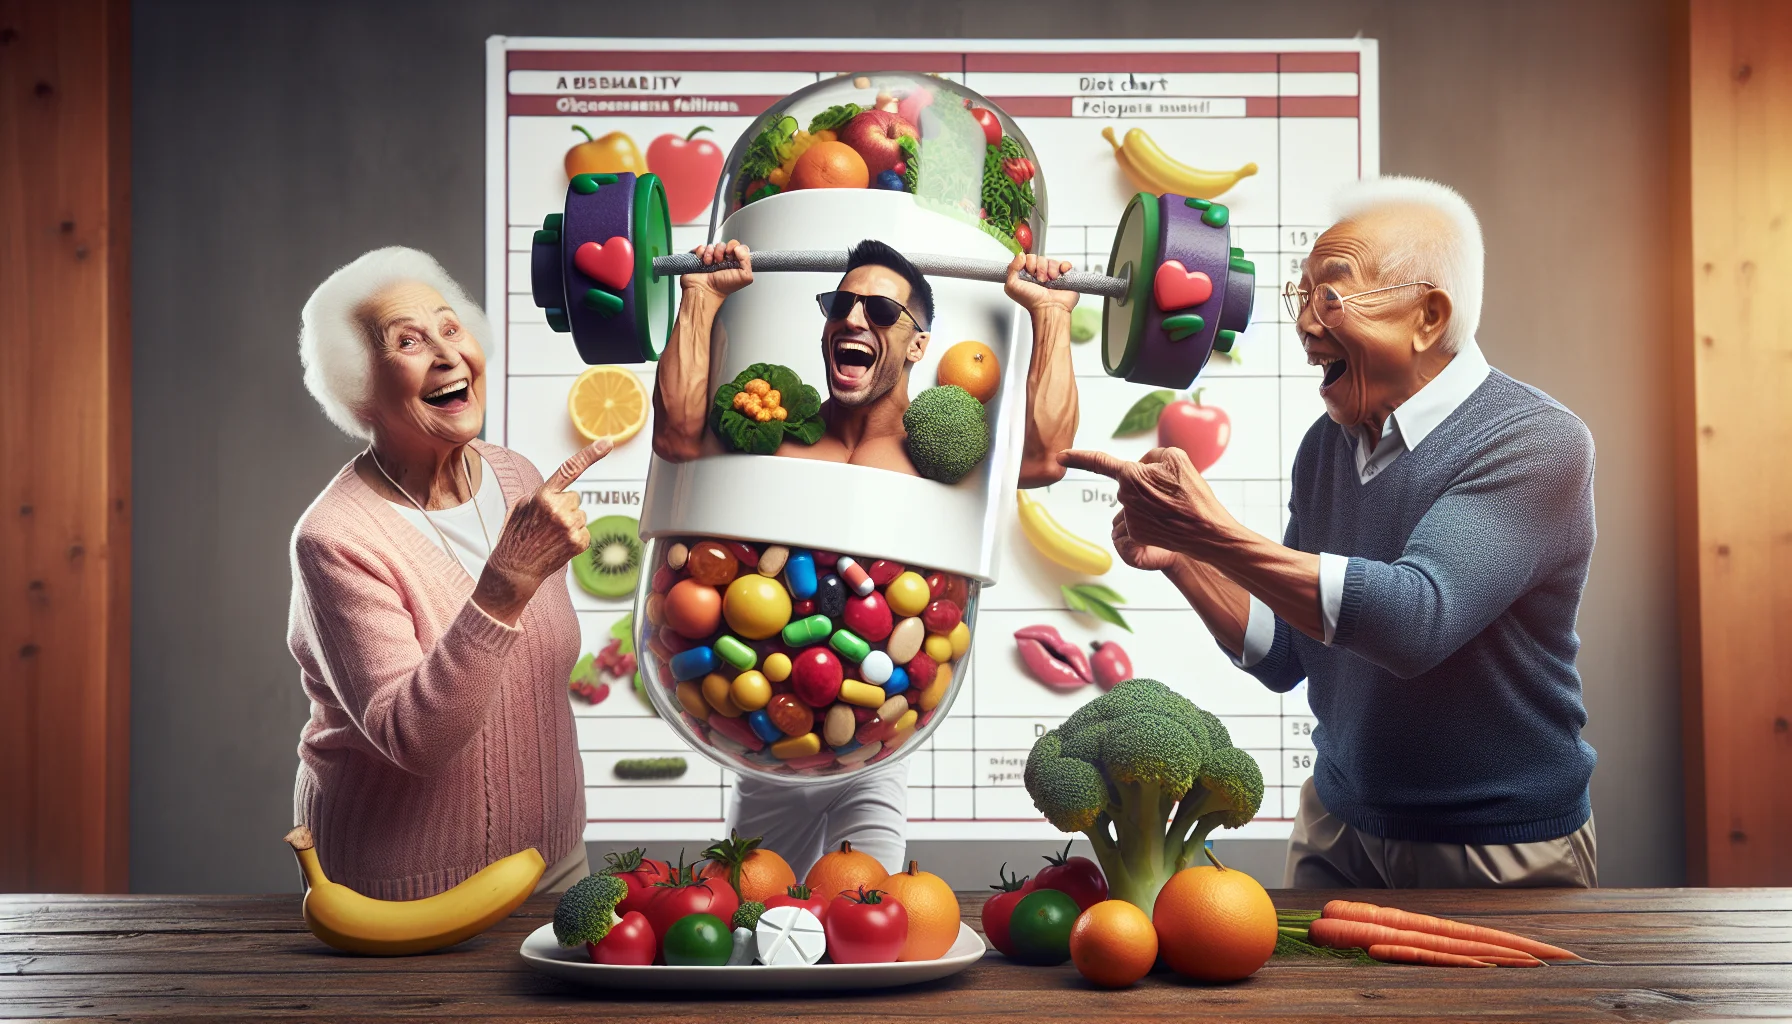 Create a humorous, realistic image of three elderly individuals sharing a playful moment at a 'Vitamin Party'. One is a Hispanic woman, enjoying a large, cartoonish pill filled with colourful fruits symbolising various vitamins. The second is a Caucasian man playfully lifting a barbell made of vegetables, symbolising the power of a healthy diet, and the third person is an Asian man, laughing while pointing at a diet chart which showcases funny food items like broccoli wearing sunglasses and carrots lifting weights. The atmosphere is light-hearted and positive, showing how choosing healthy foods and supplements can bring joy.